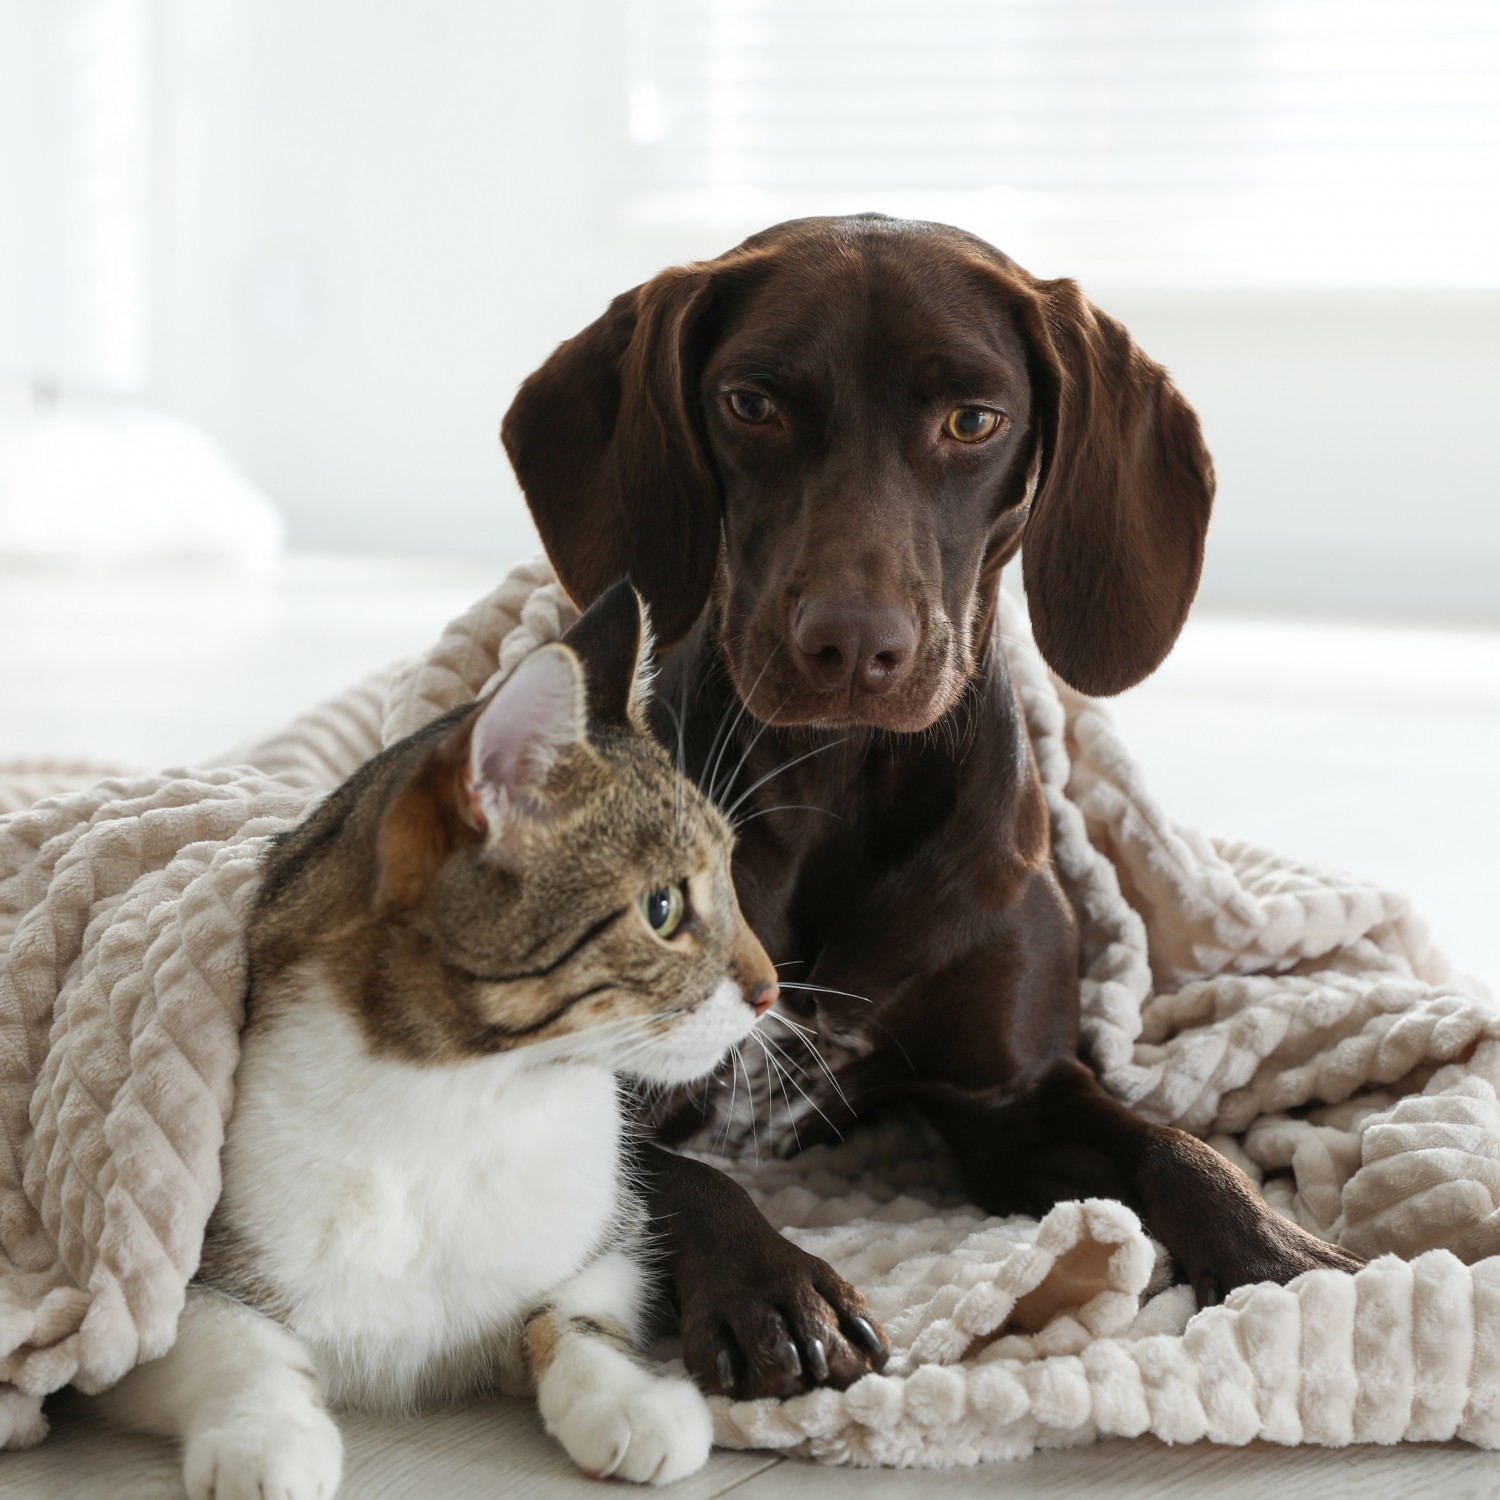 Brown Dog and Cat Snuggled in Blanket - Surgery & Anesthesia